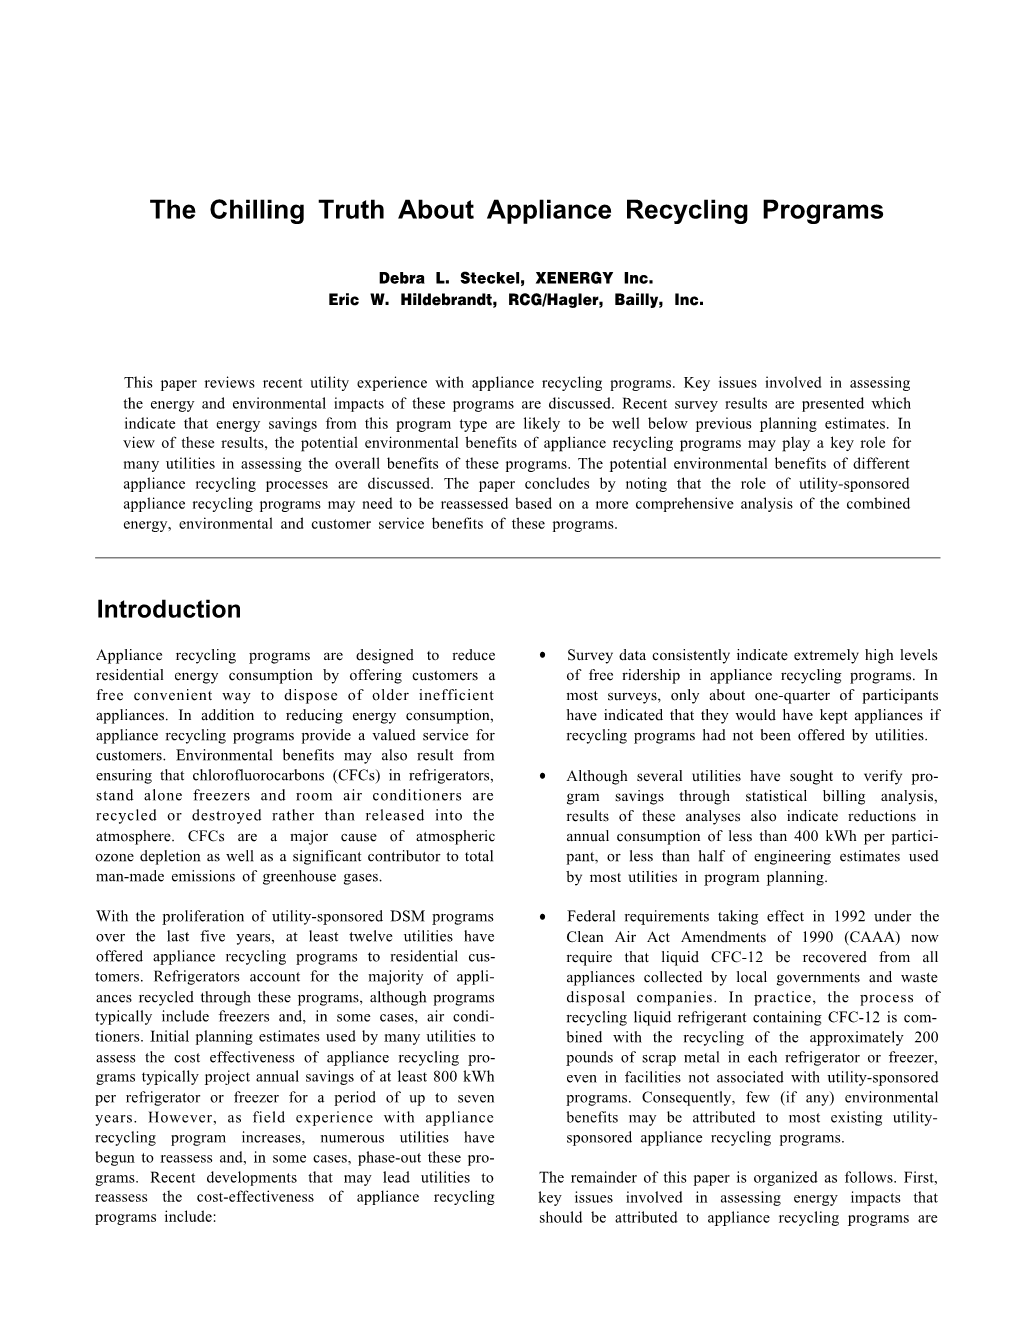 The Chilling Truth About Appliance Recycling Programs